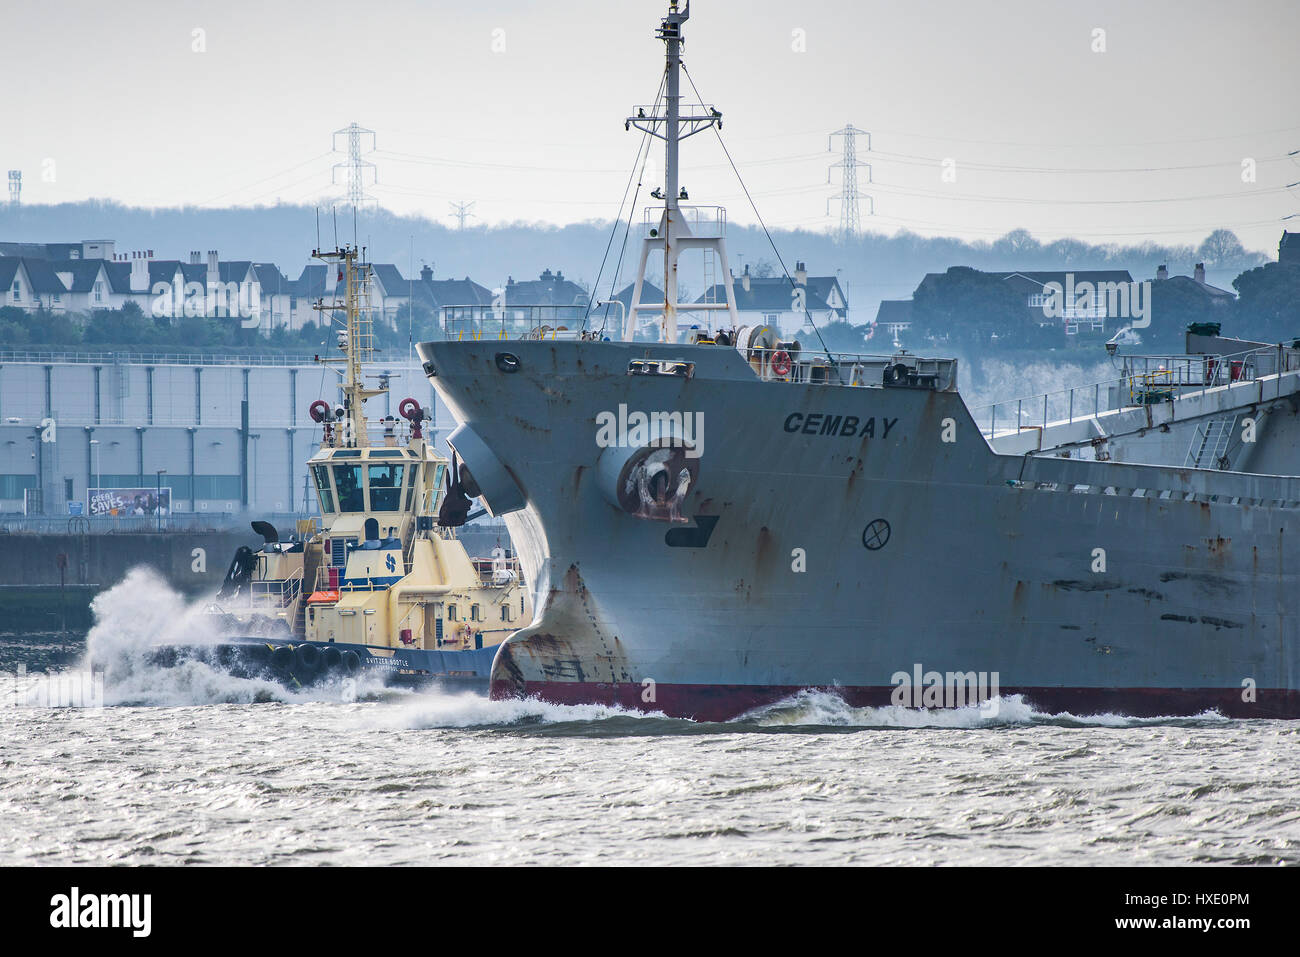 The tug Spitzer Bootle escorting the cement carrier Cembay steaming downriver on the River Thames. Stock Photo